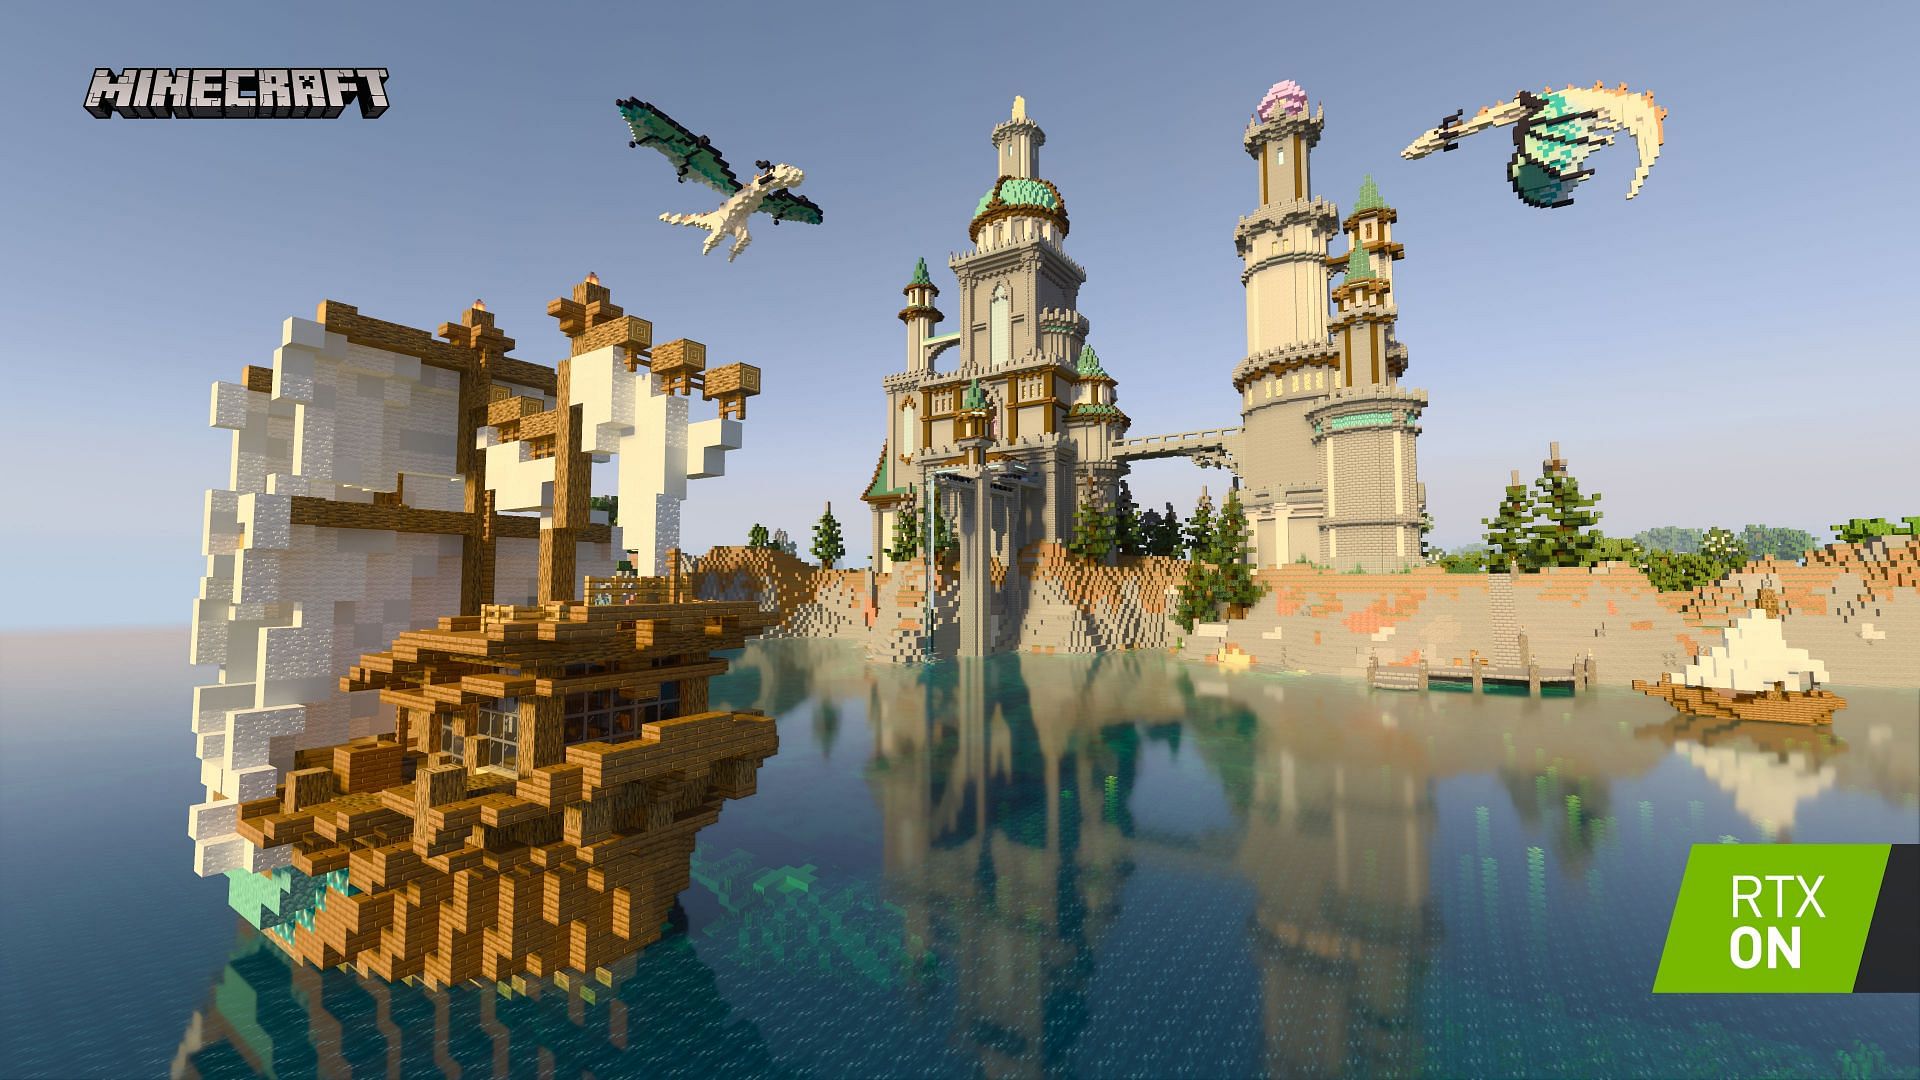 Minecraft undergoes a complete transformation when ray tracing is enabled. (Image via Mojang and Nvidia)